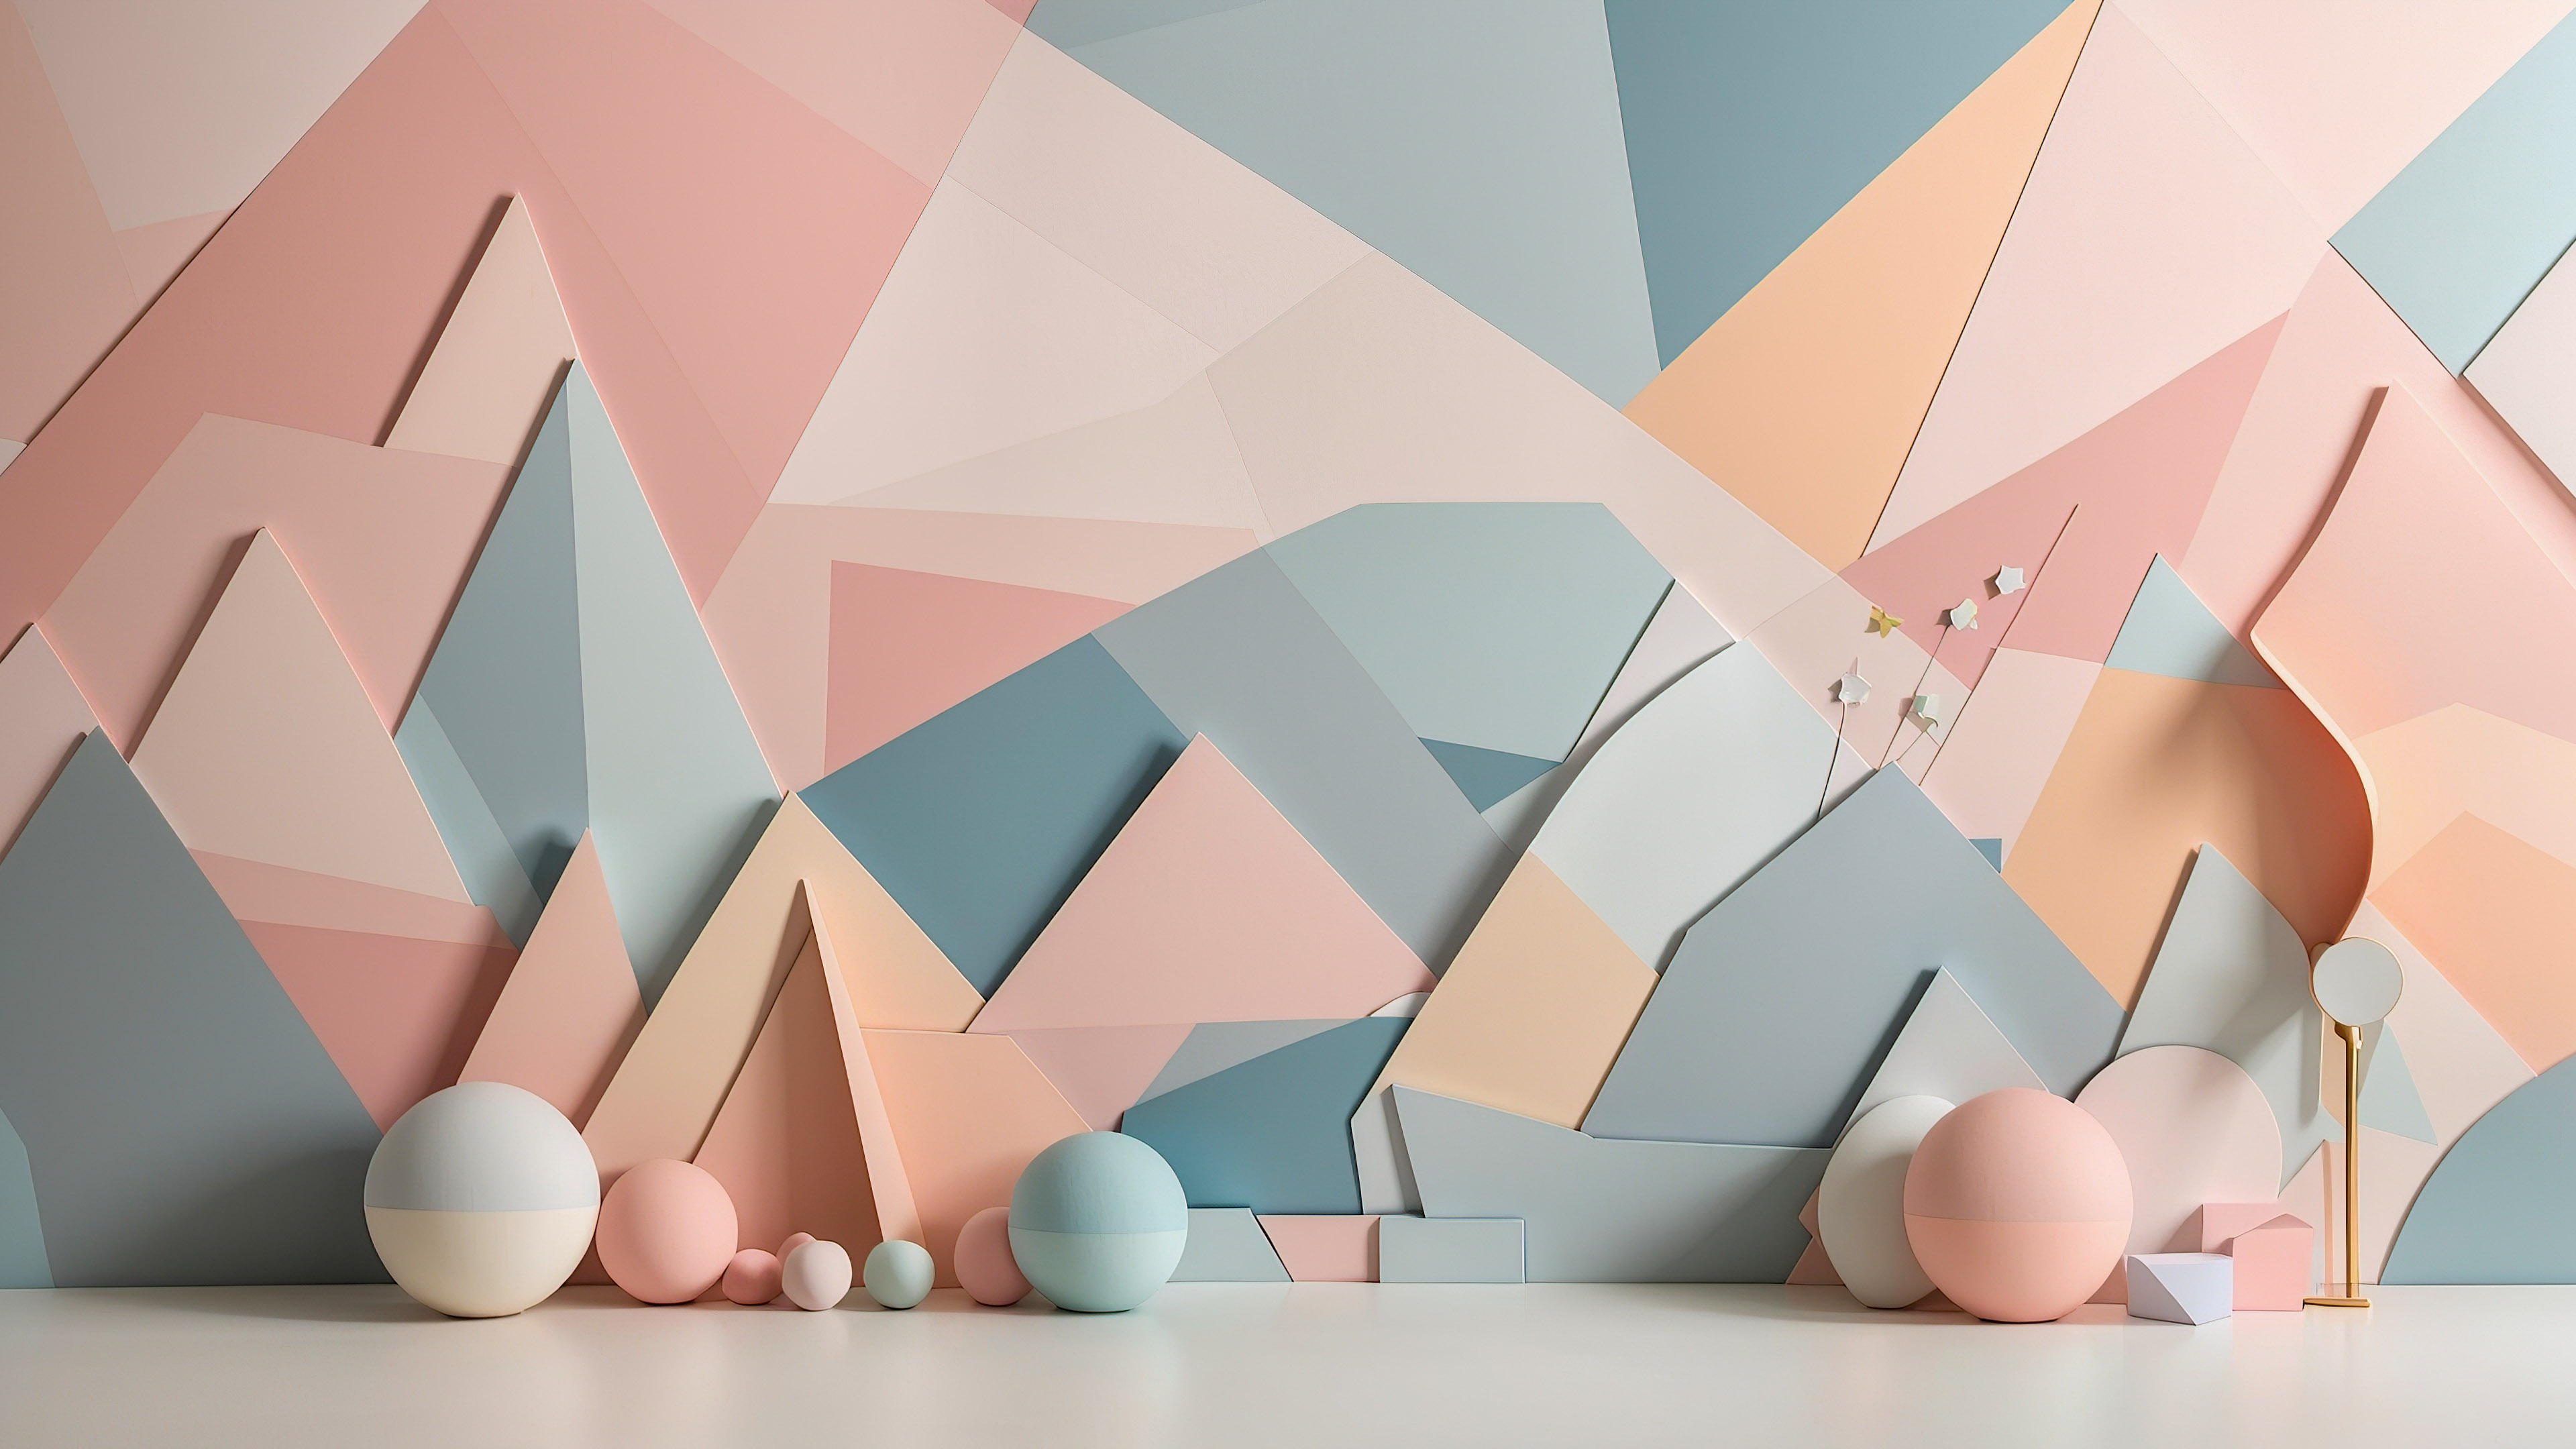 Transform your screen with abstract art wallpaper, featuring soft pastel shades and geometric shapes, offering a harmonious blend of elegance and modernity.